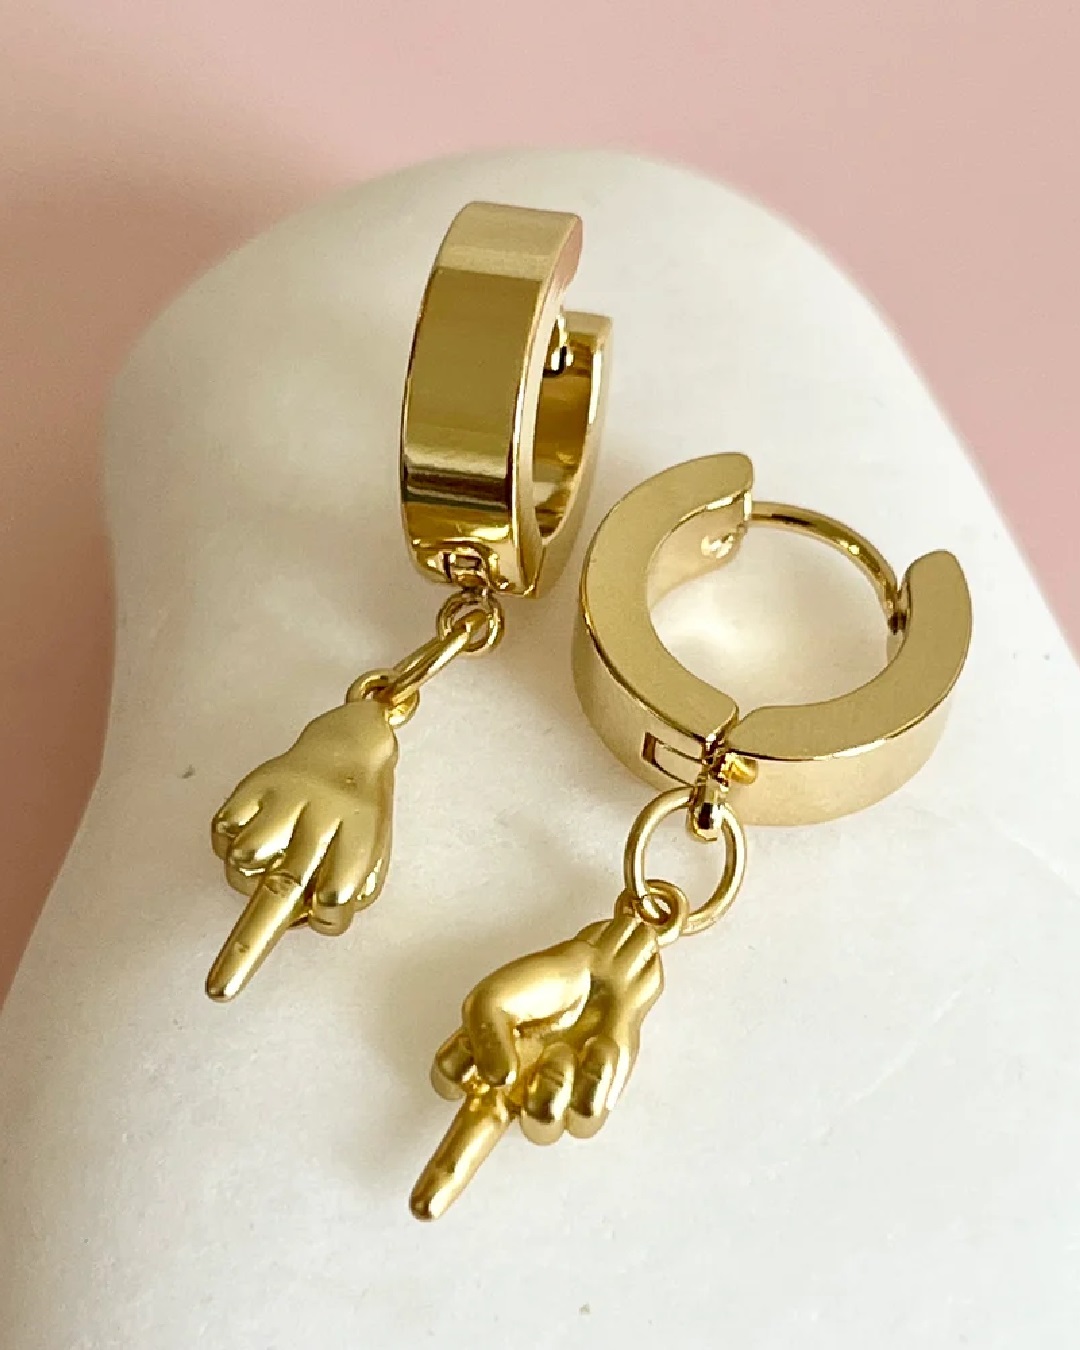 Gold middle finger charm hanging off gold hoop earrings